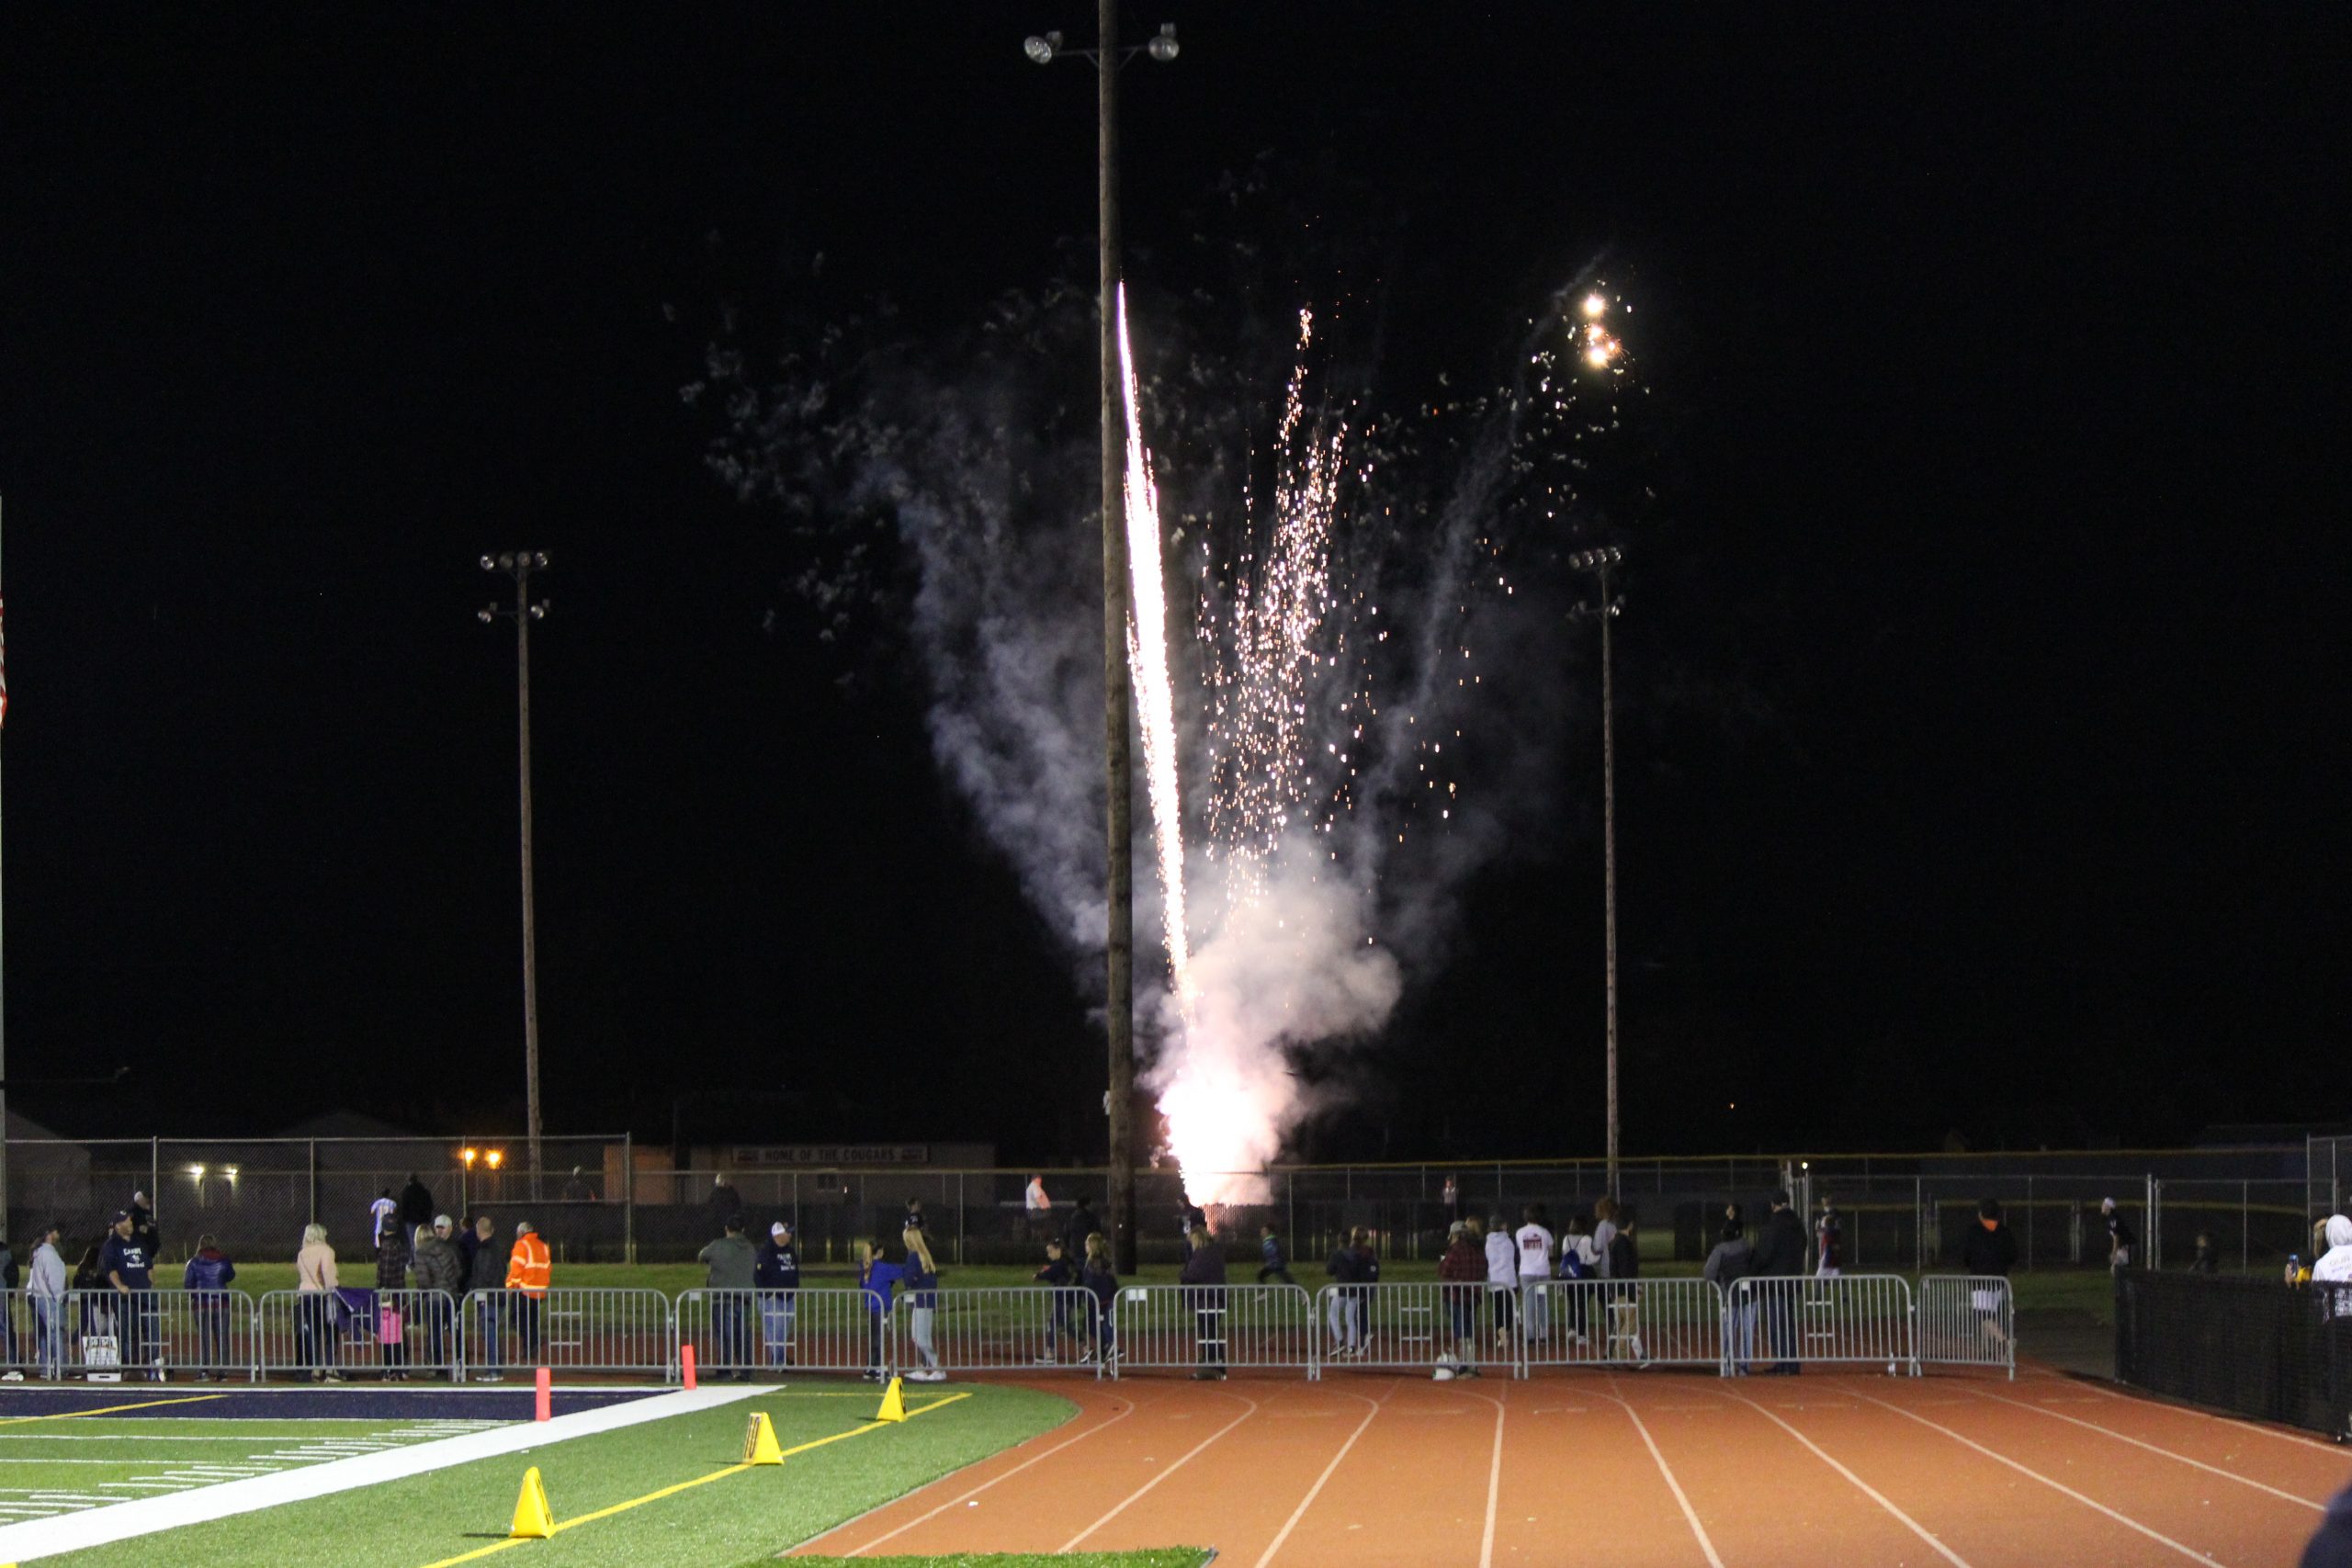 Canby City Council to Reconsider Noise Exemption for High School Fireworks